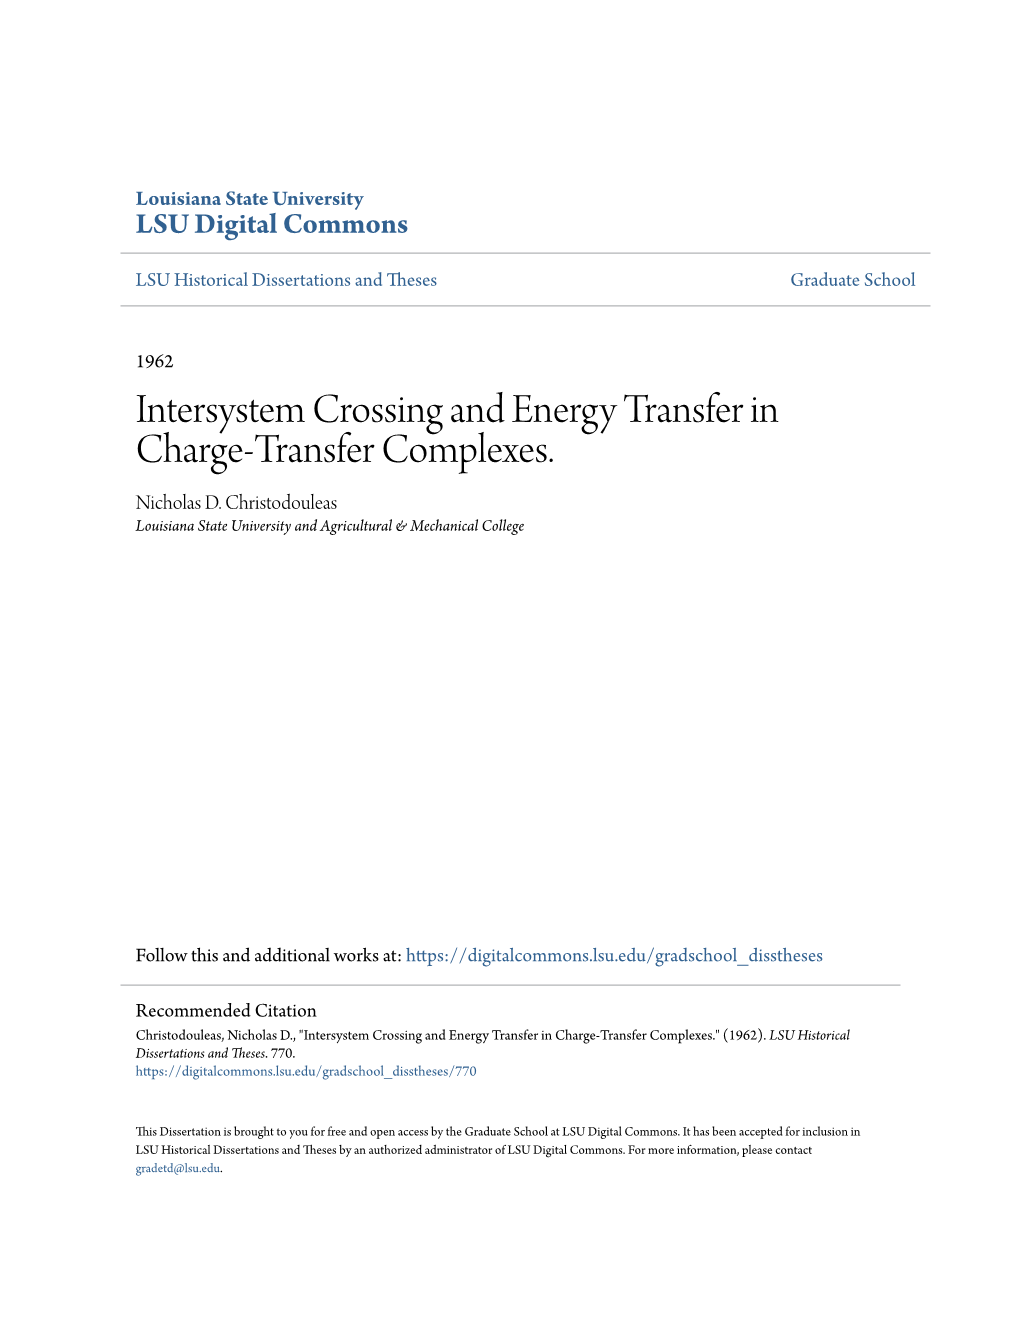 Intersystem Crossing and Energy Transfer in Charge-Transfer Complexes